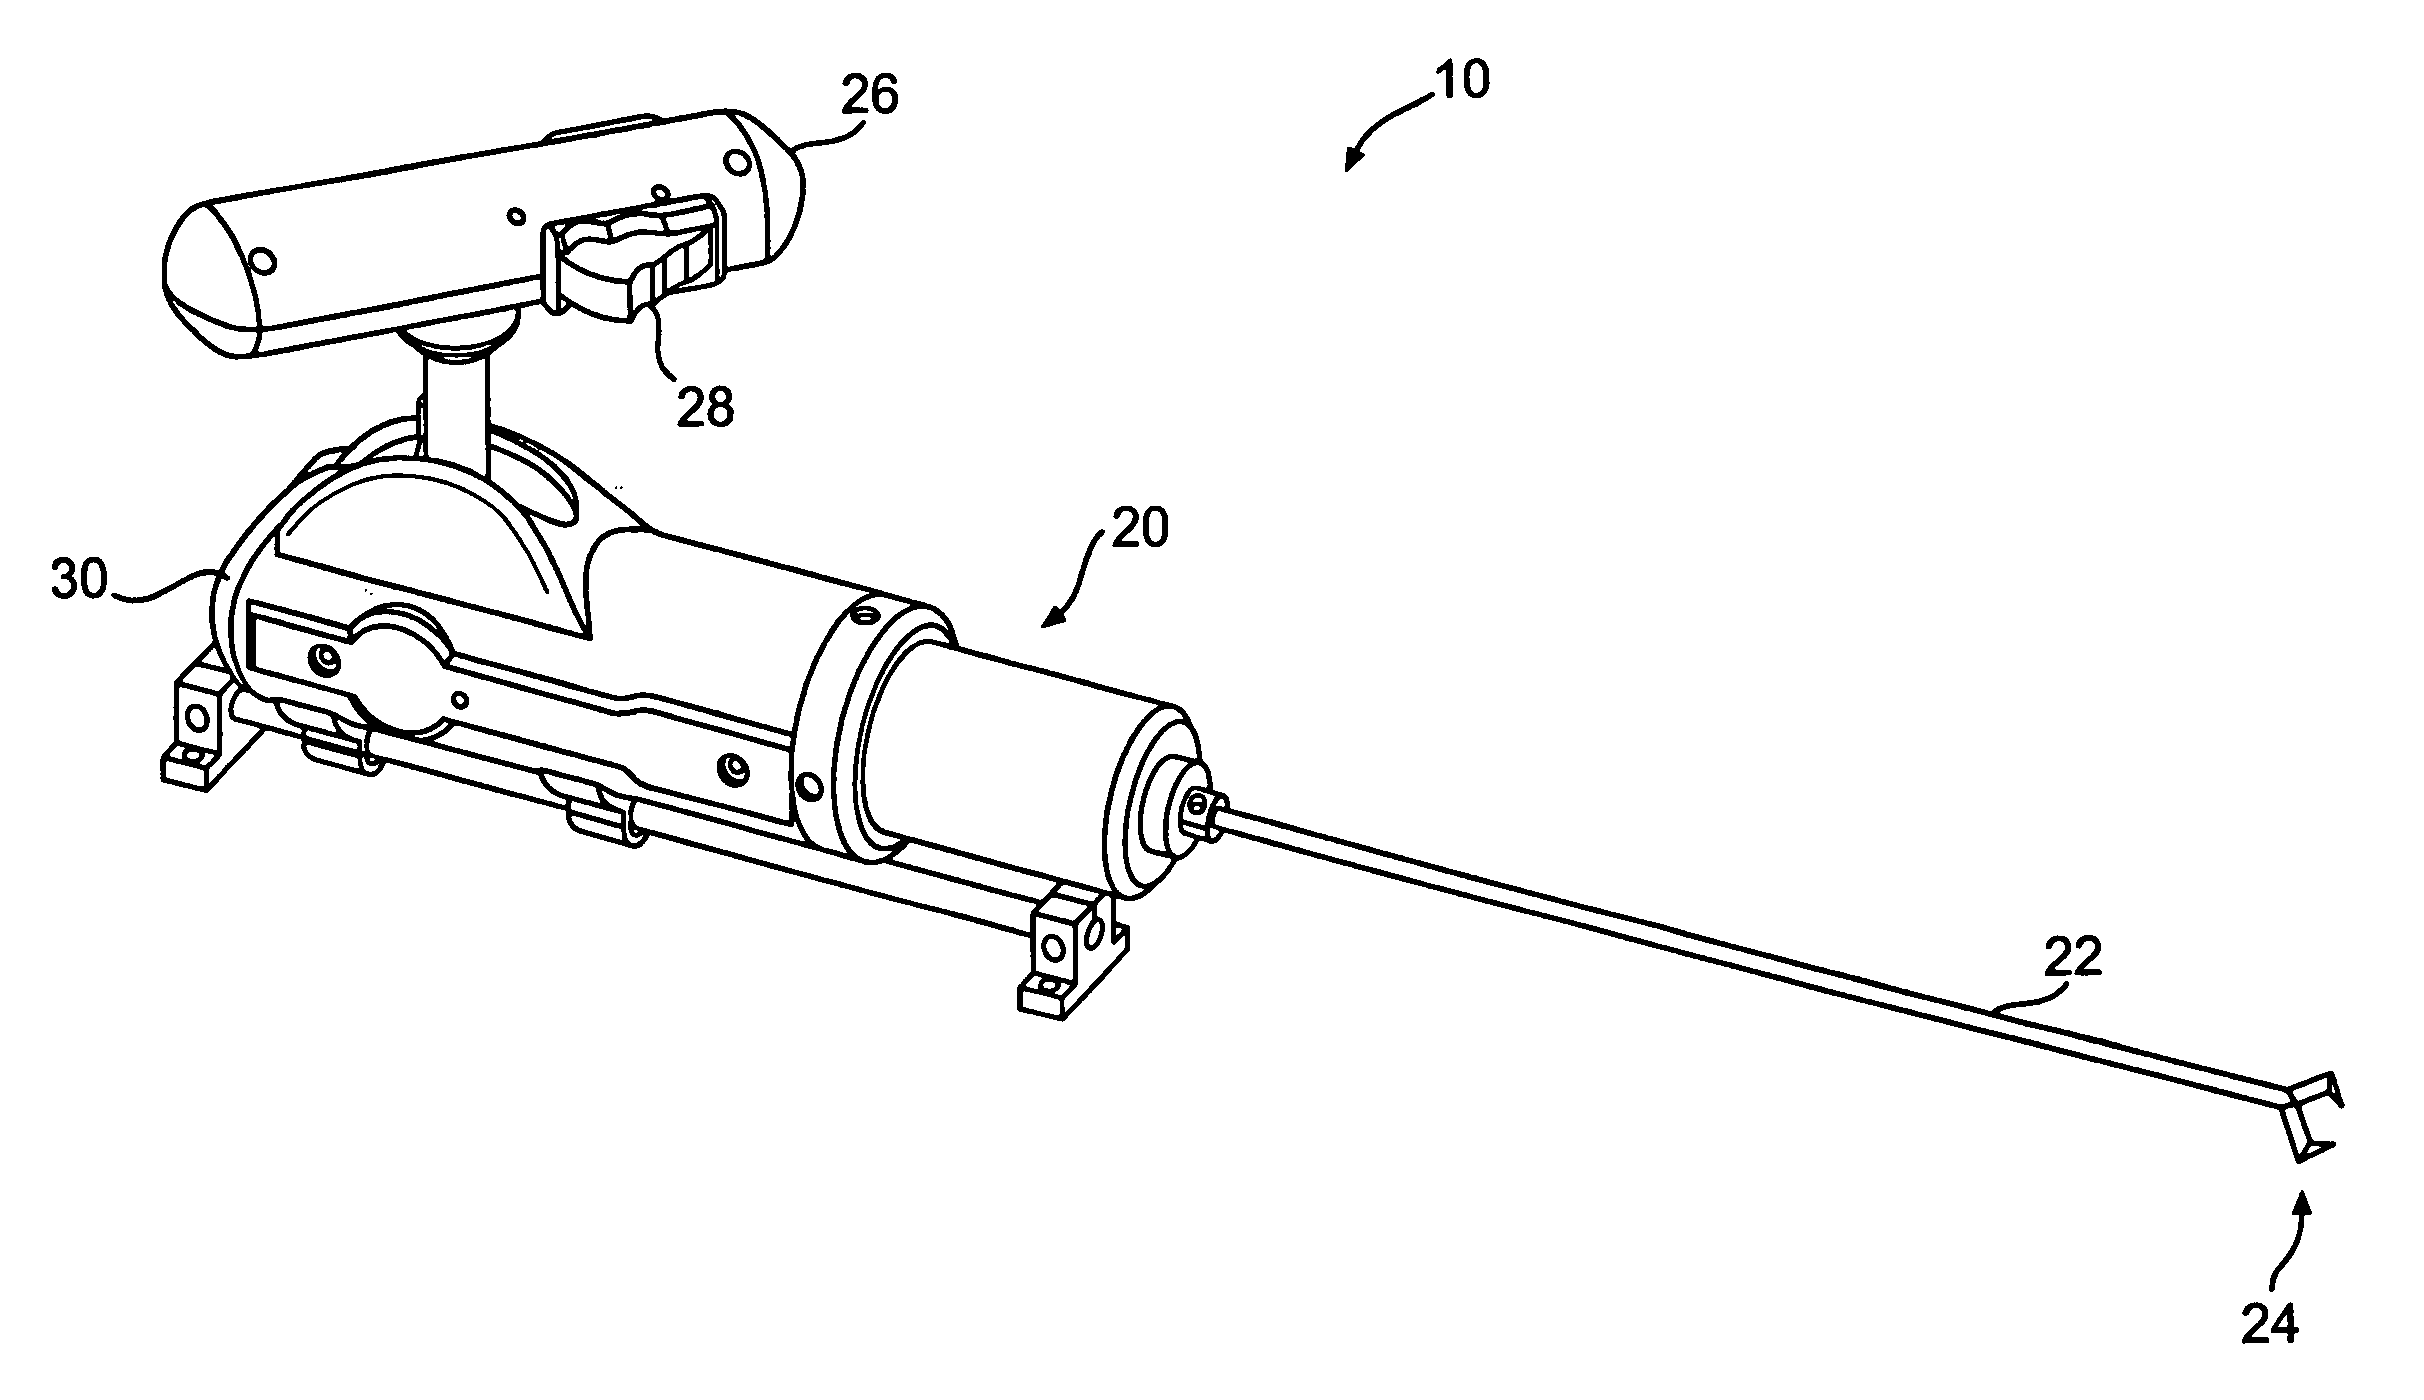 Drive systems and methods of use